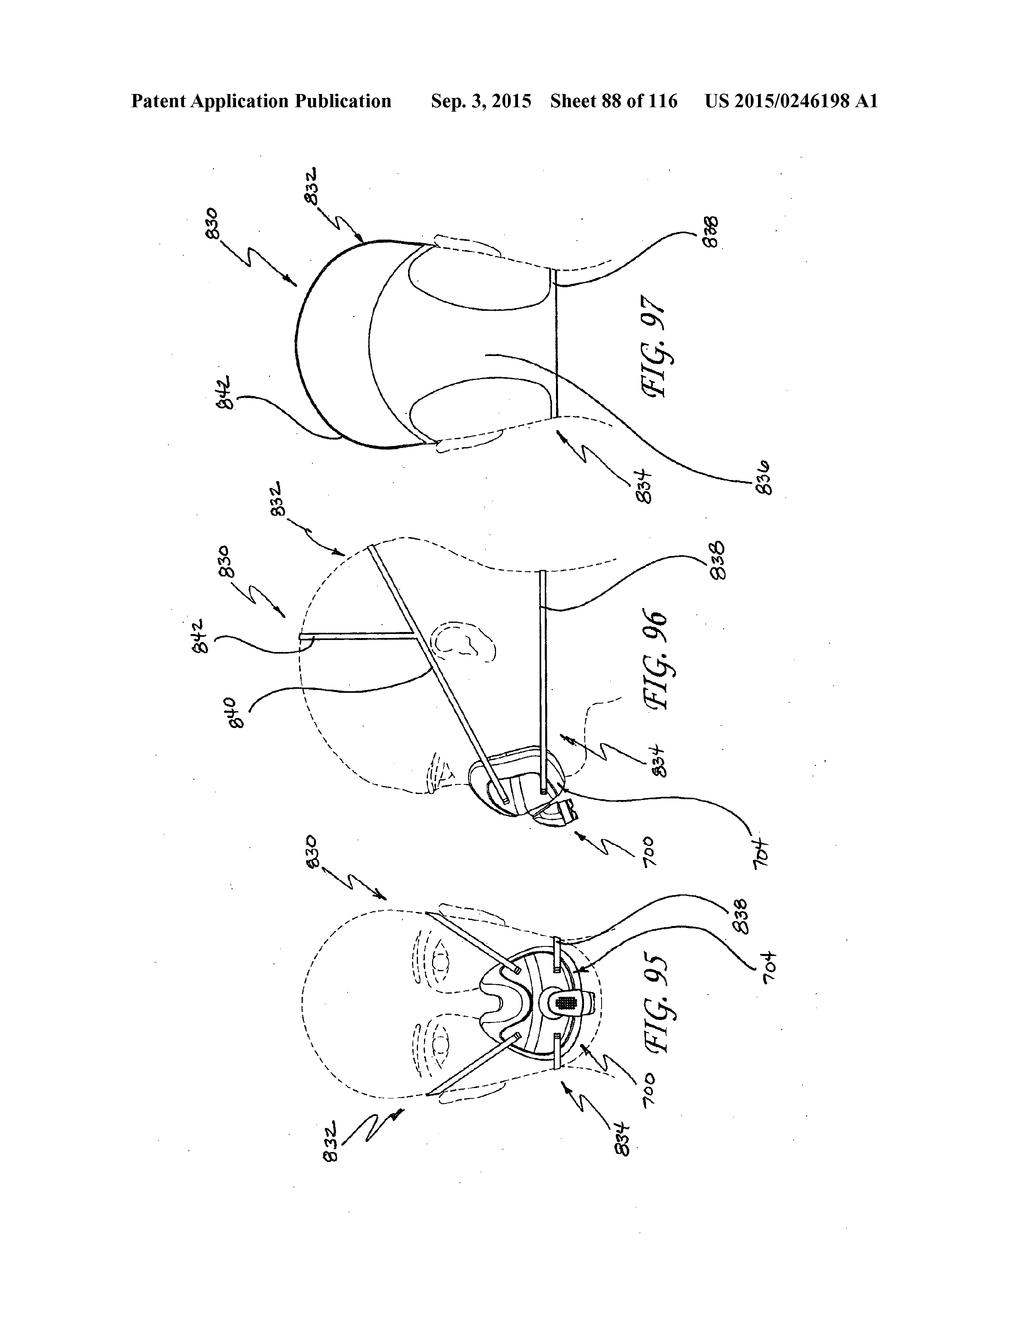 INTERFACE COMPRISING A NASAL SEALING PORTION AND A ROLLING HINGE - diagram, schematic, and image 89